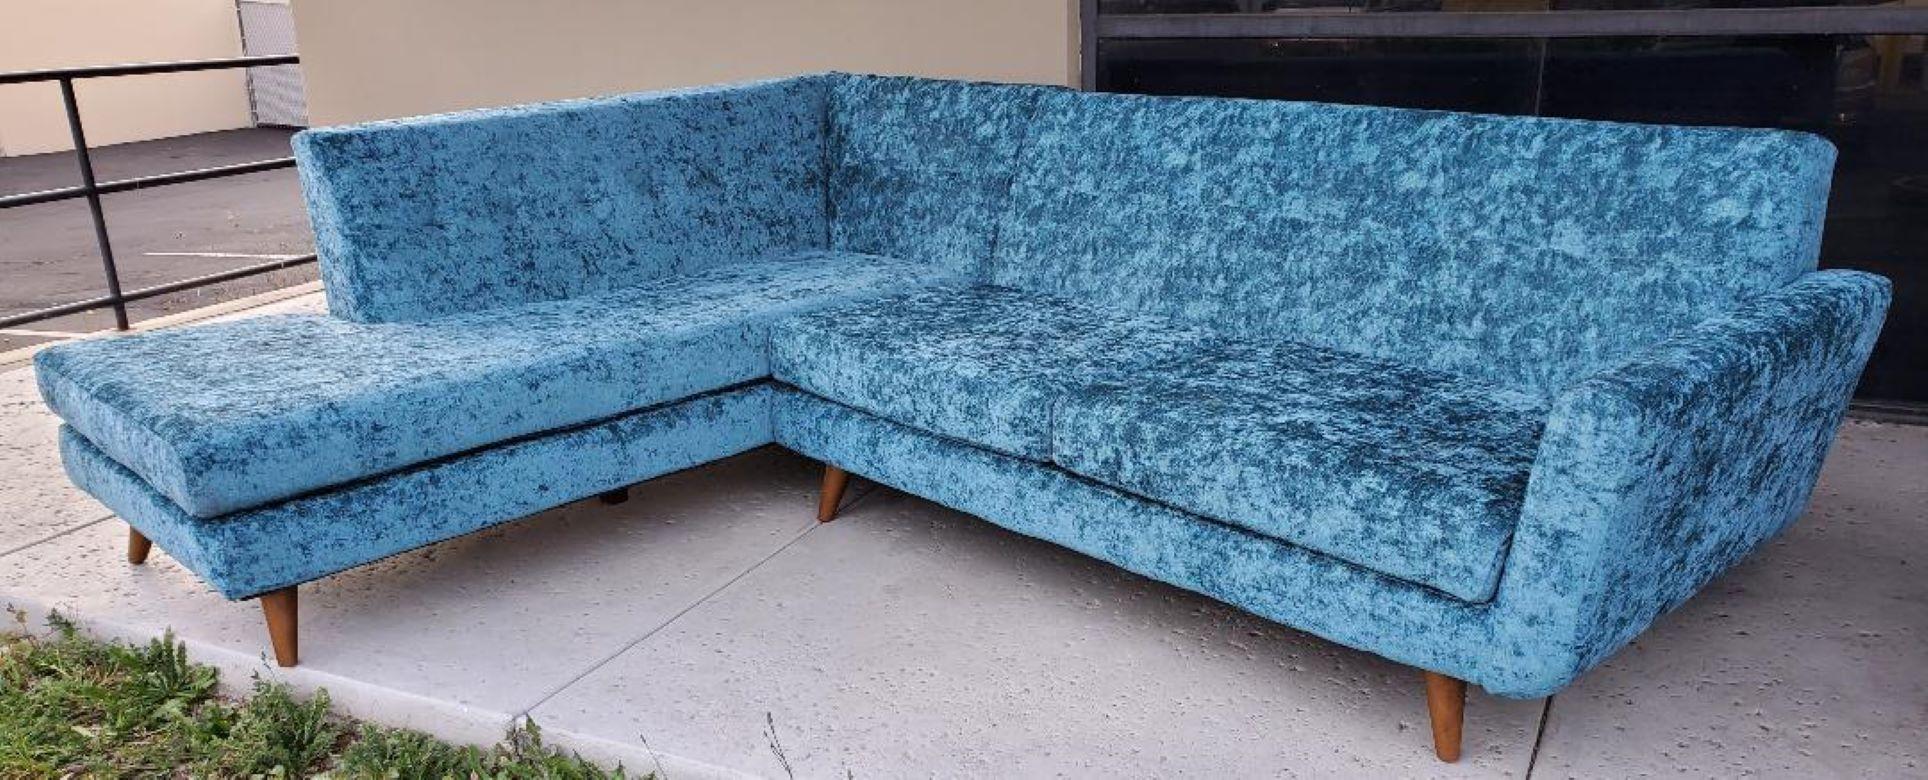 60s Low Slung Style Sectional Tapered Legs Aqua Green Crushed Velvet Upholstery For Sale 7